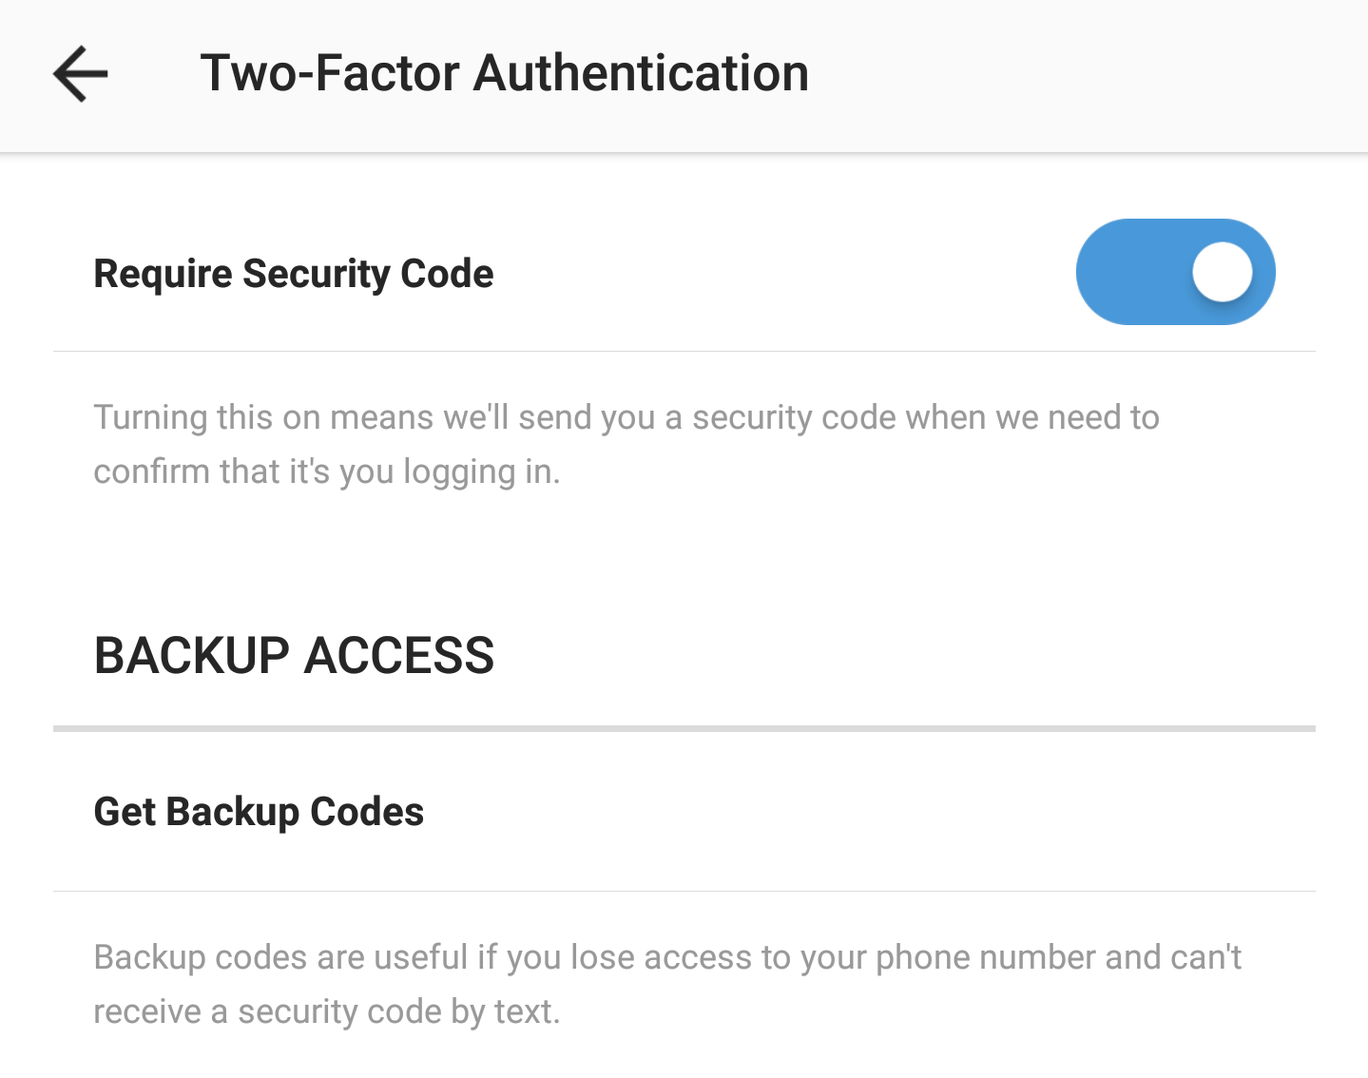 Make your Instagram account much harder to hack by enabling two-factor authentication, a security feature that protects you even if your login details are stolen. Go to your profile, tap the three dots, open Two-Factor Authentication and toggle it on.